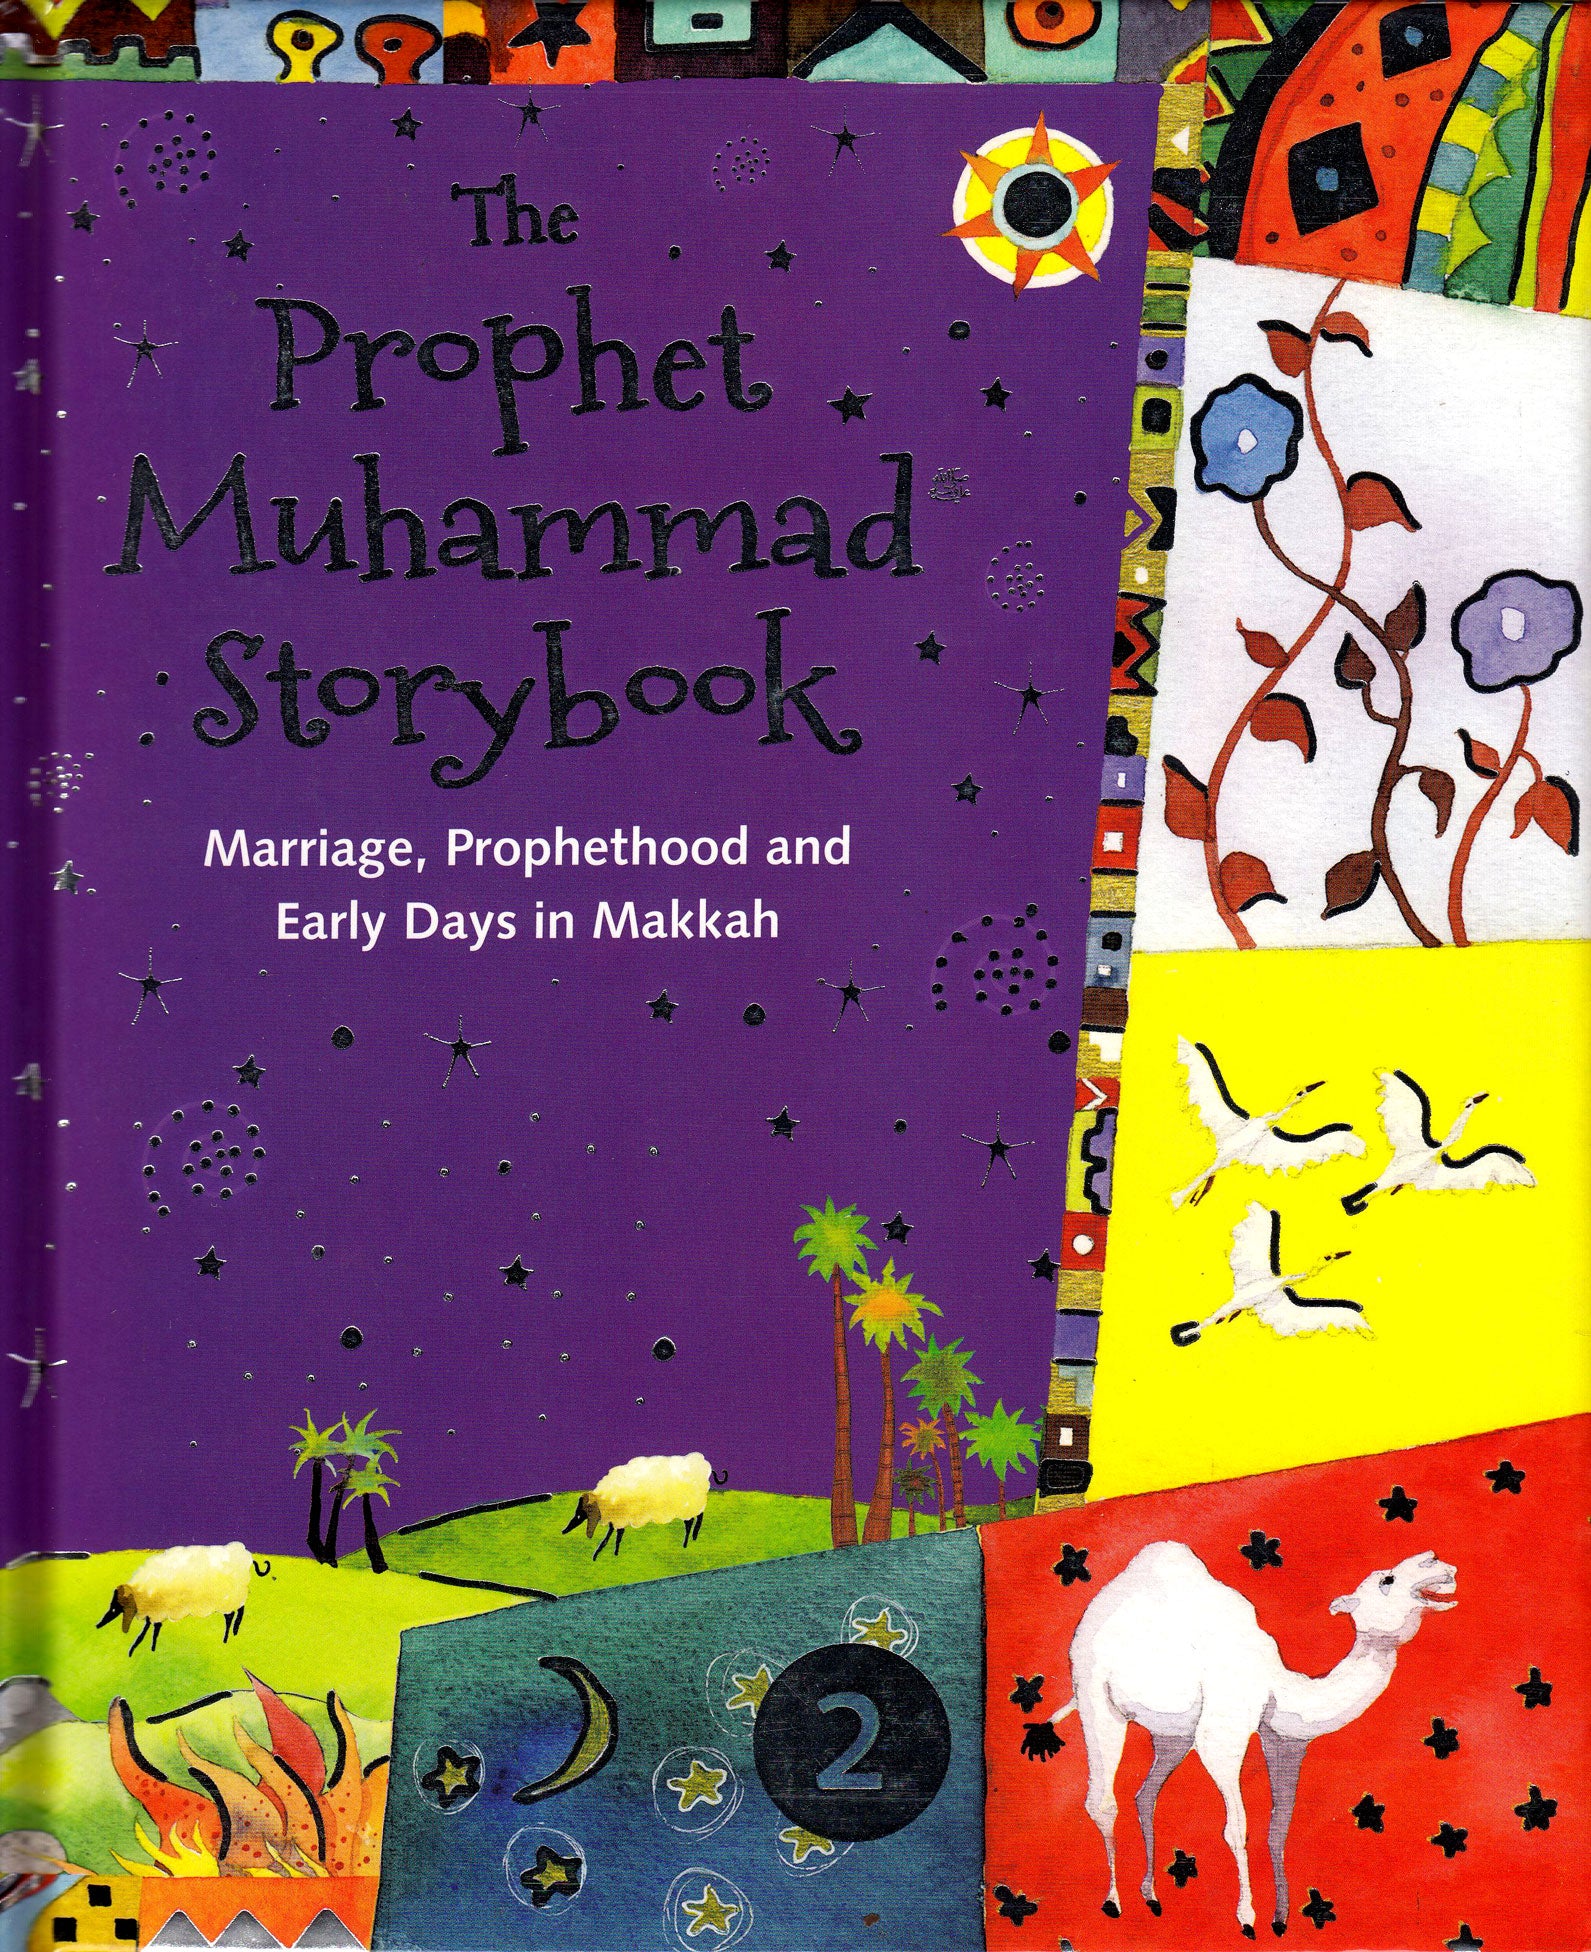 The Prophet Muhammad Storybook - Book 2 - Marriage, Prophethood and Early Days in Makkah (Hardback)